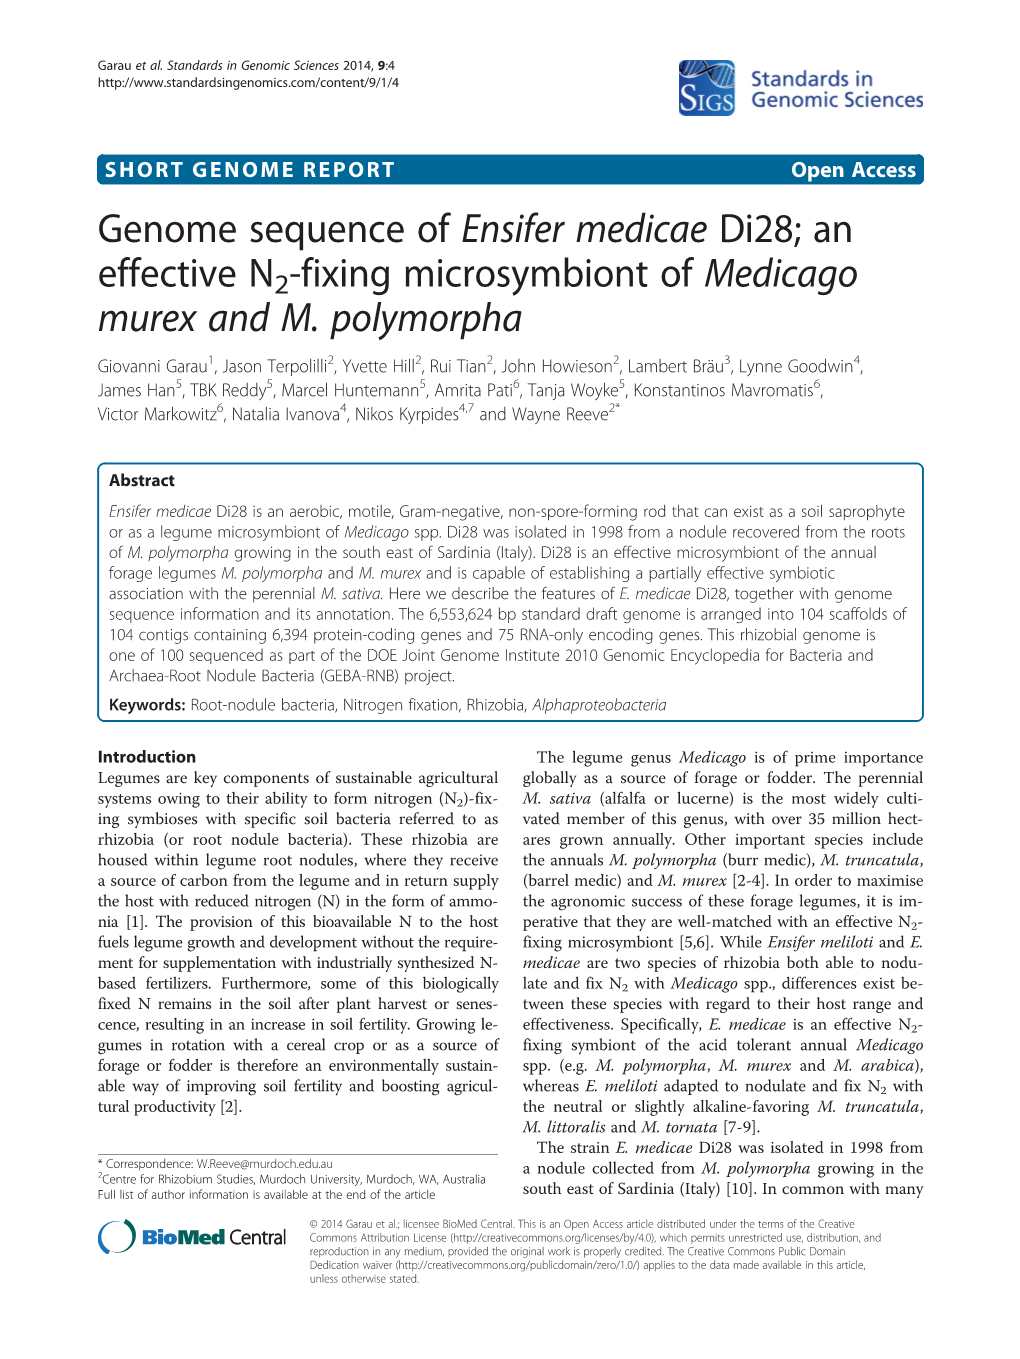 Genome Sequence of Ensifer Medicae Di28; an Effective N2-Fixing Microsymbiont of Medicago Murex and M